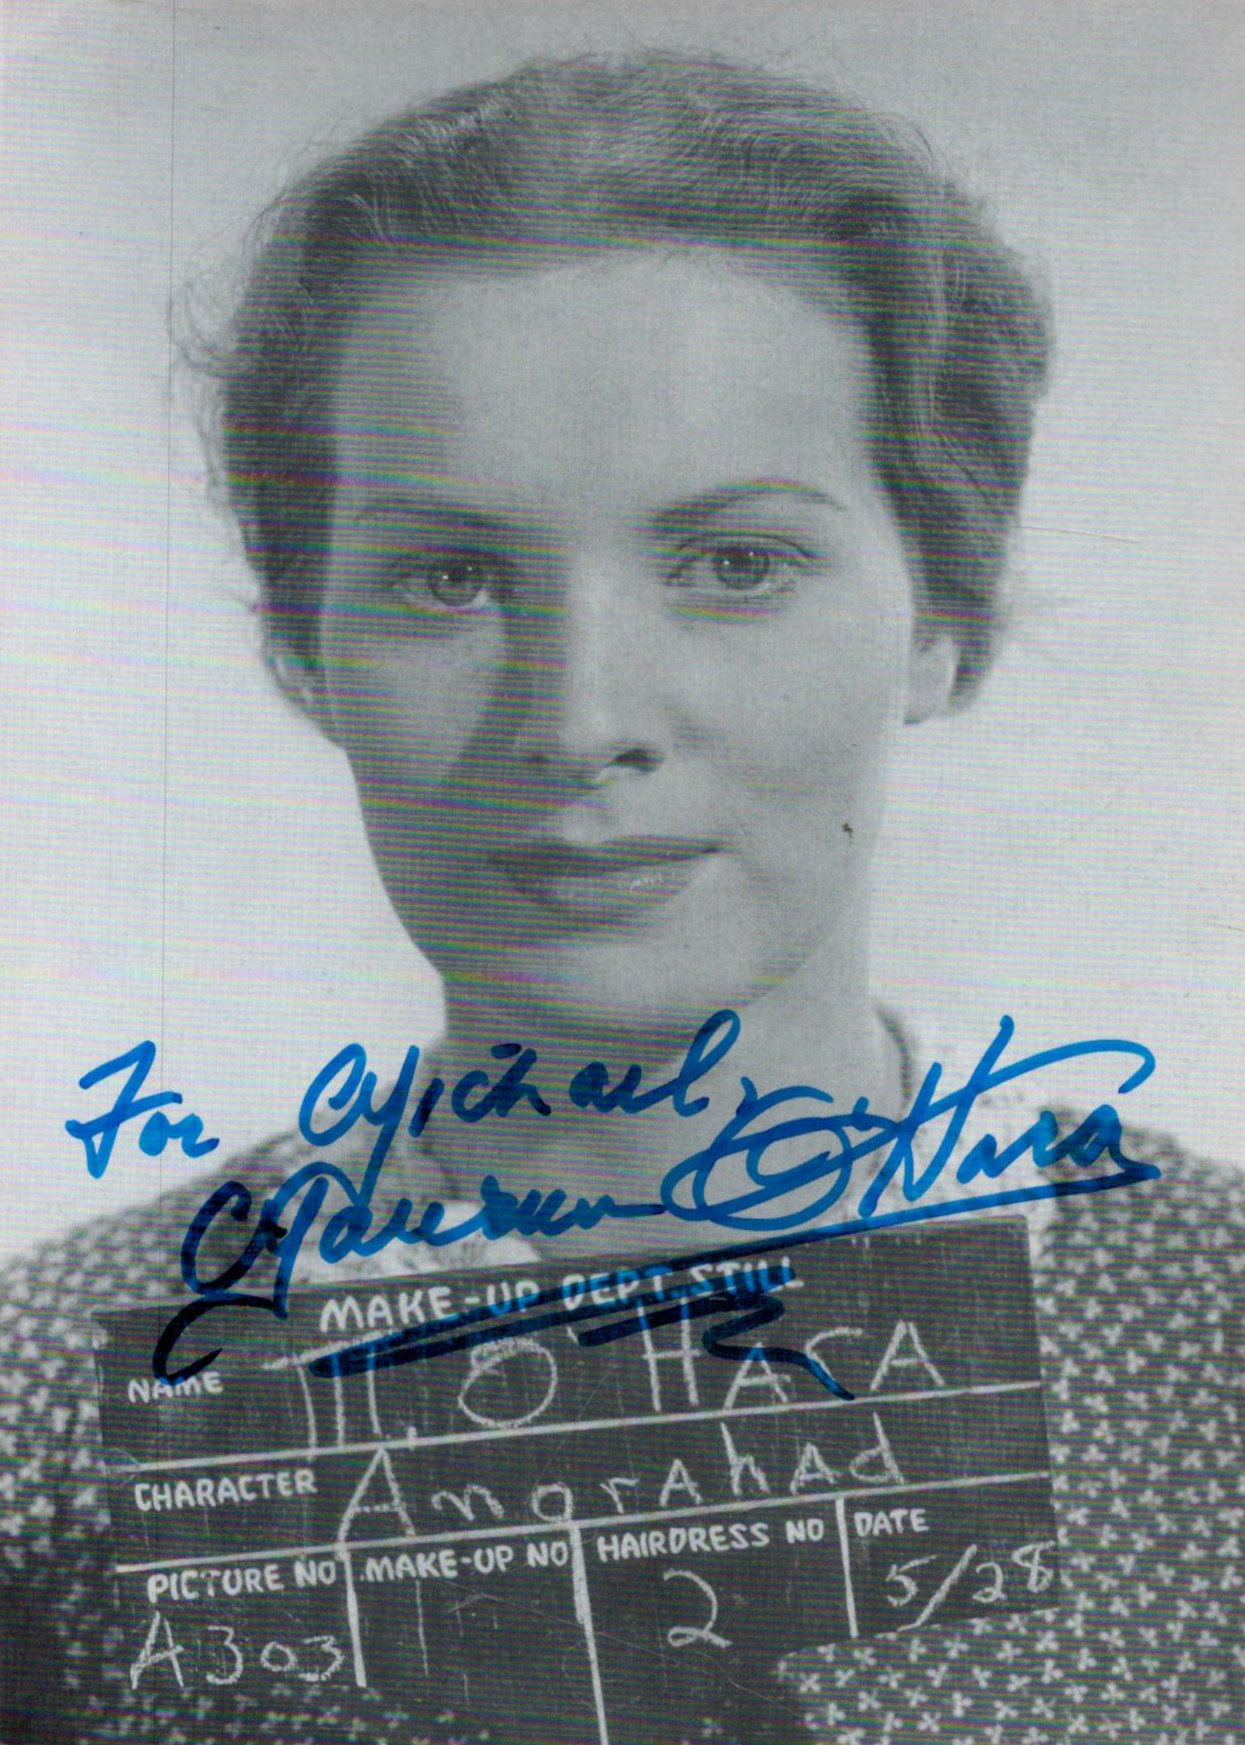 Actress Maureen O'Hara Signed 6 x 4 approx black and white magazine page cutting. Signed in blue